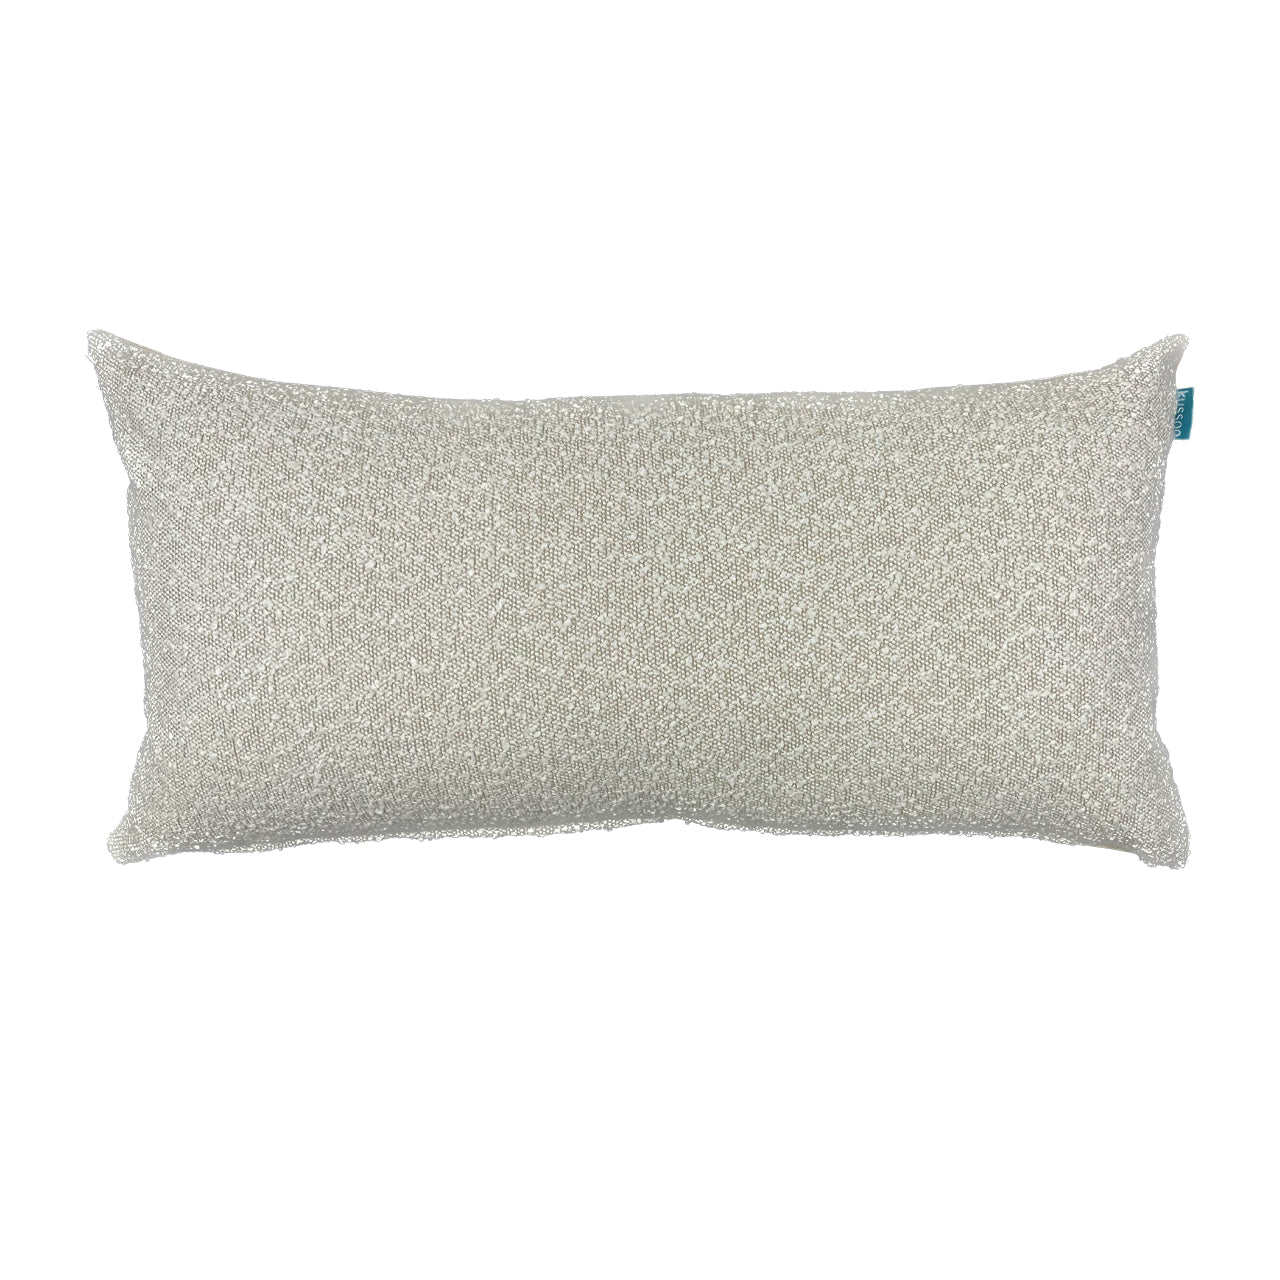 Kussen-Boucle-Offwhite-front-40x80-cm